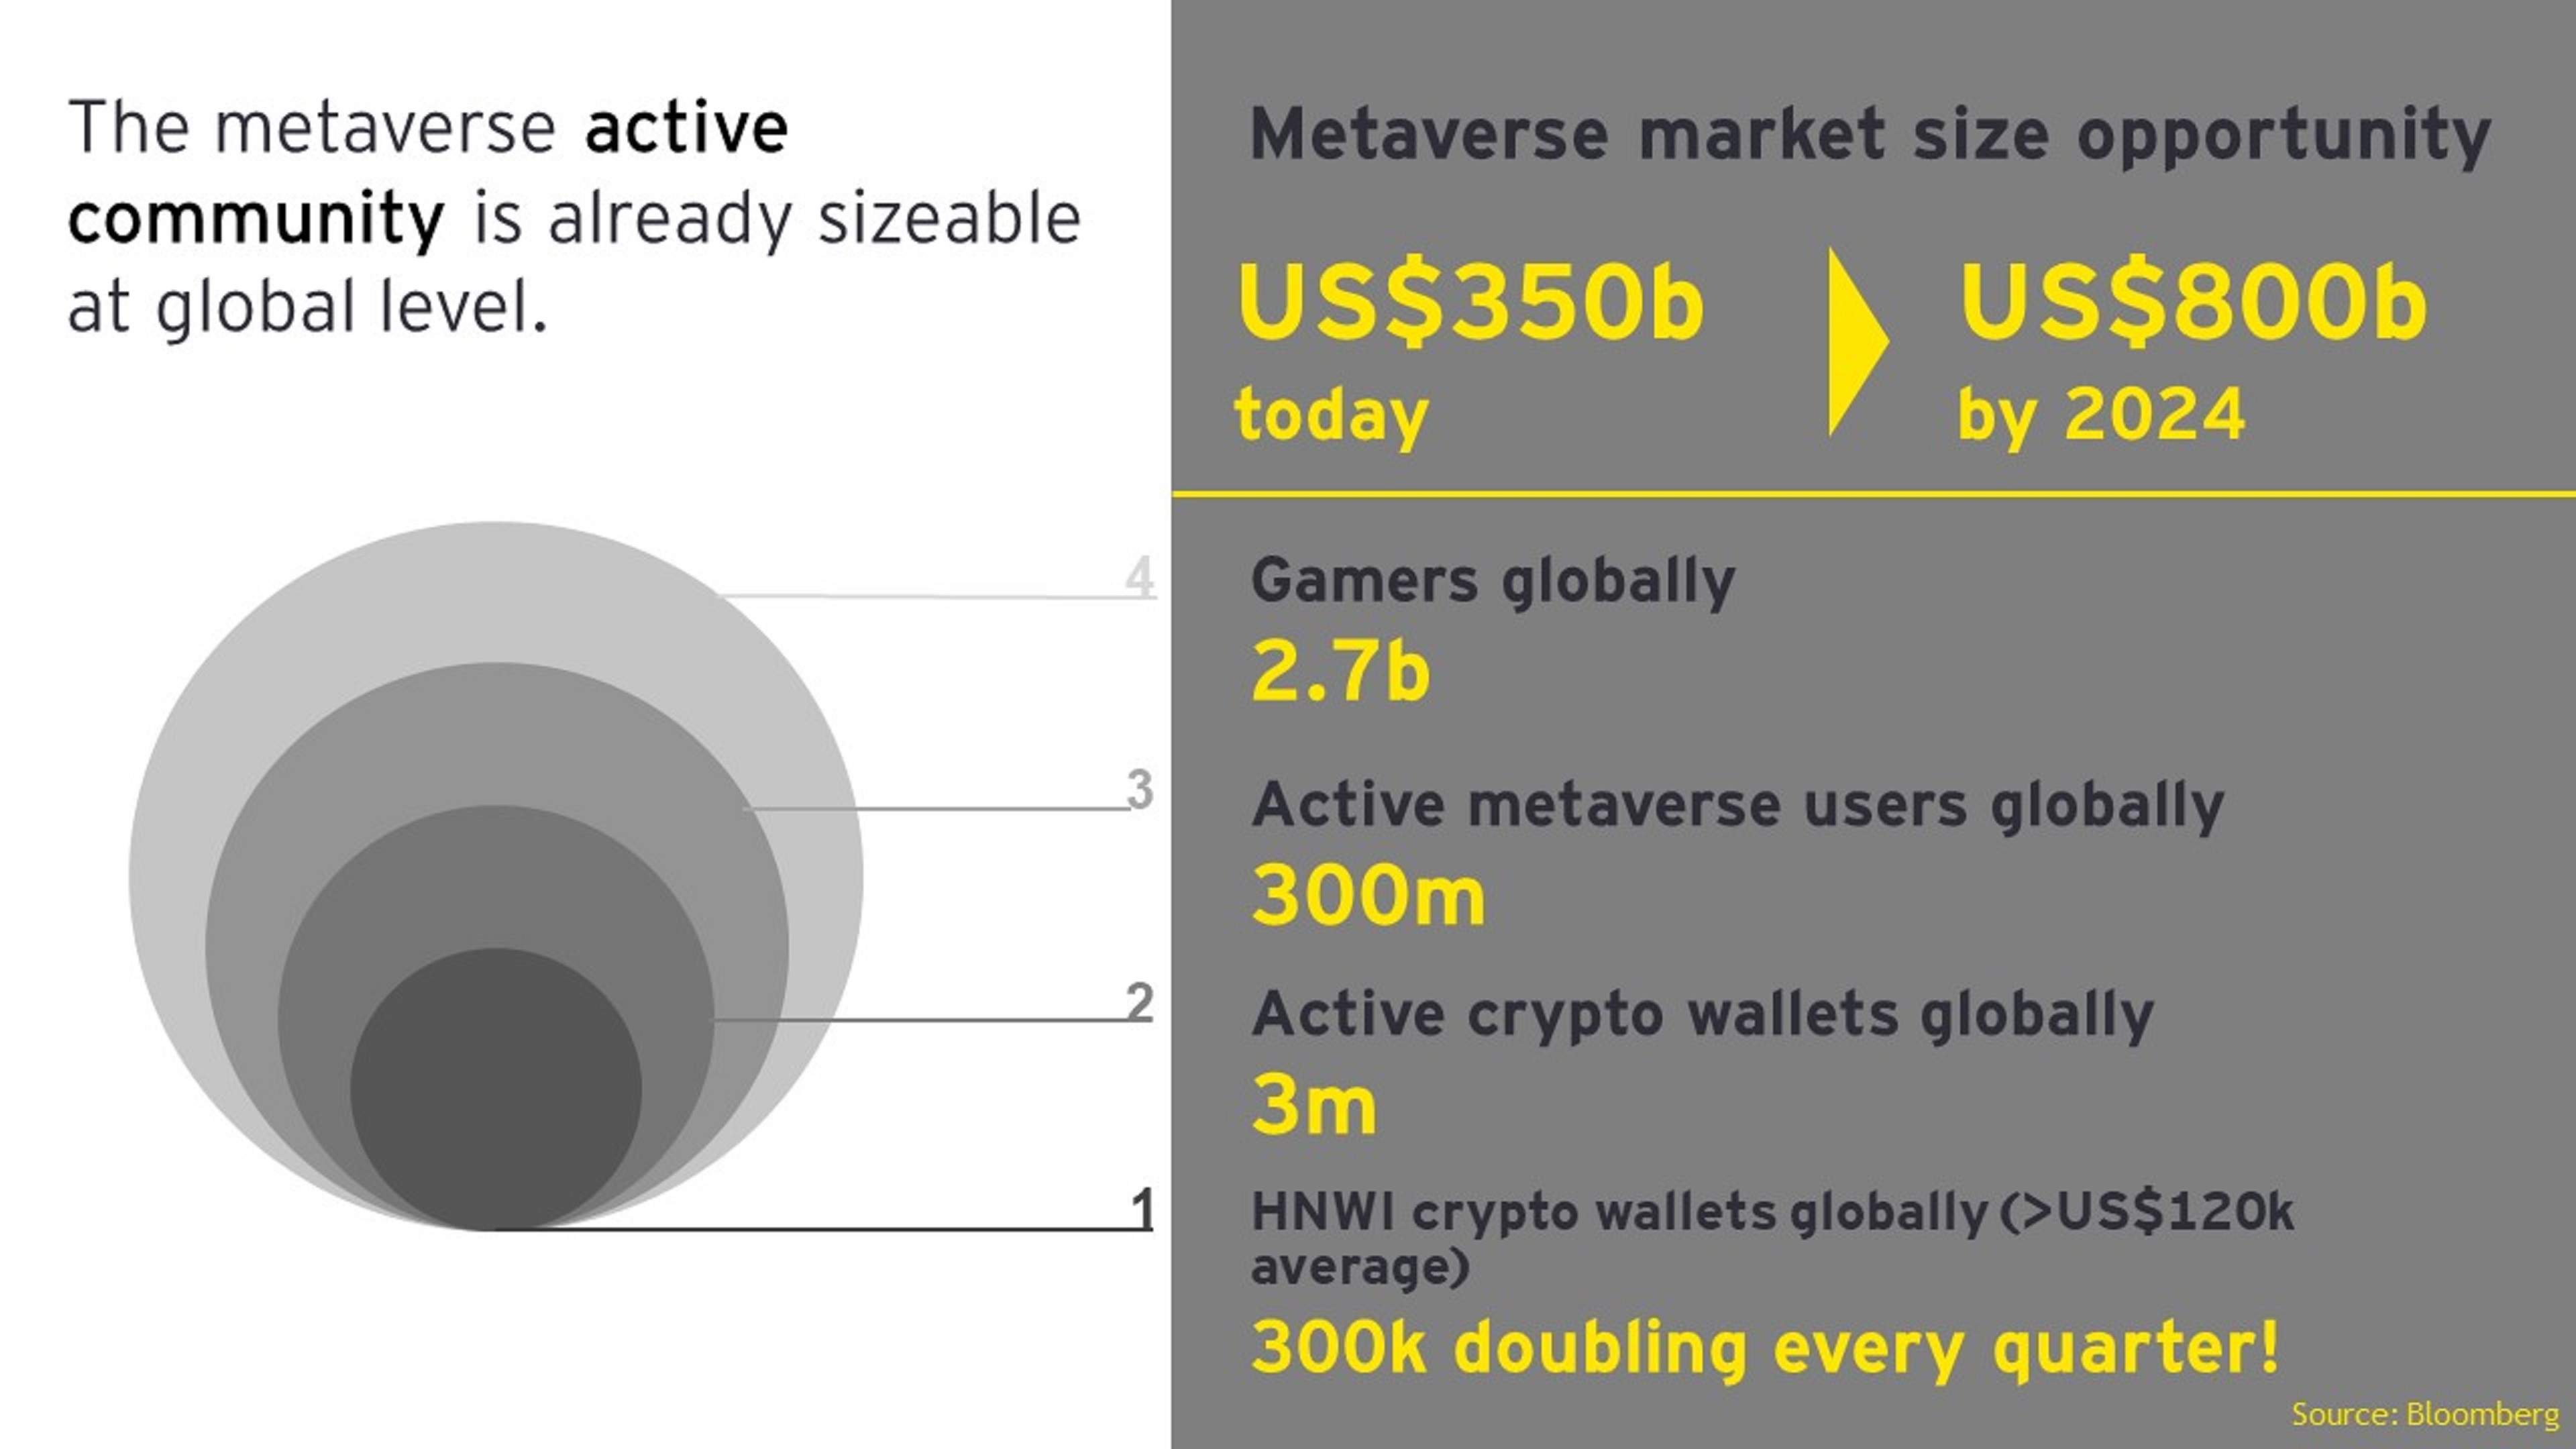 Graph showing figures around the metaverse market size opportunity